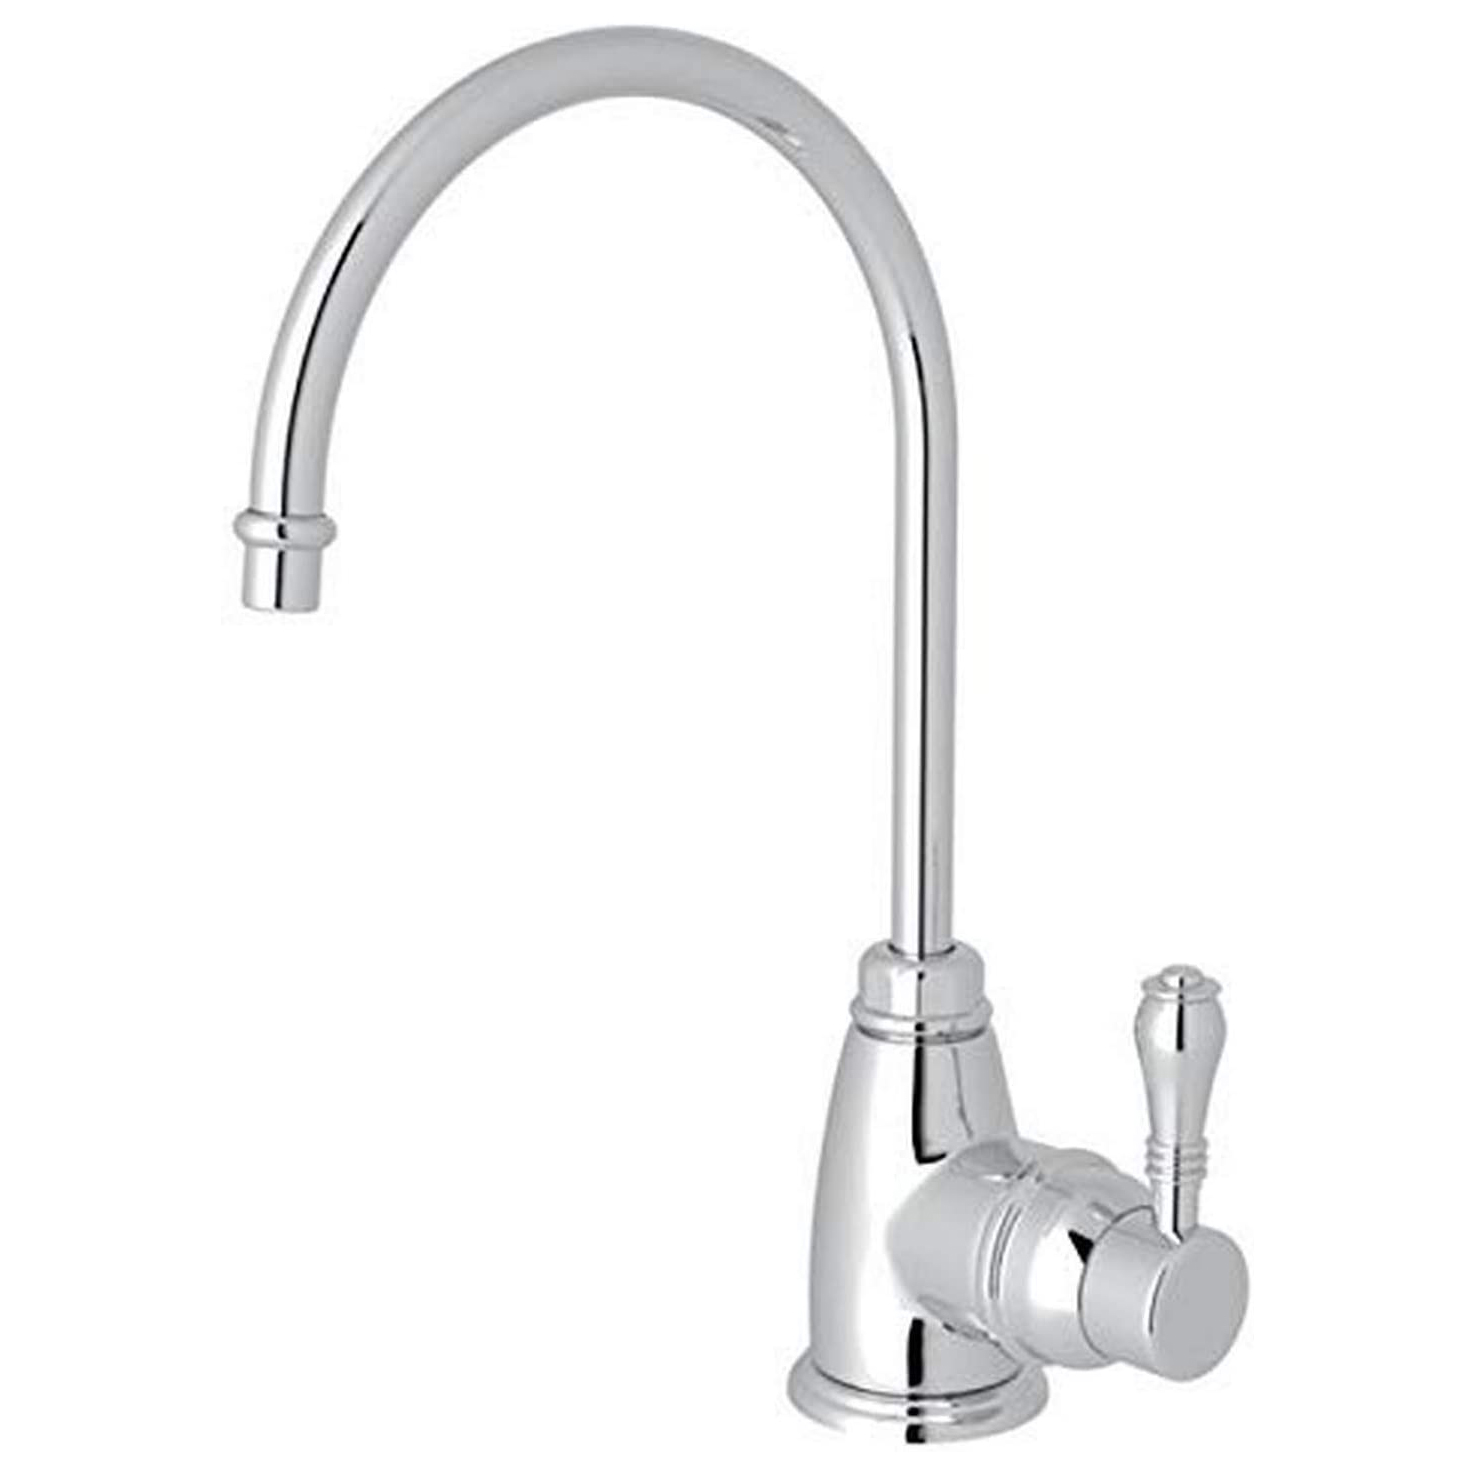 San Julio Traditional C-Spout Hot Water Faucet in Chrome